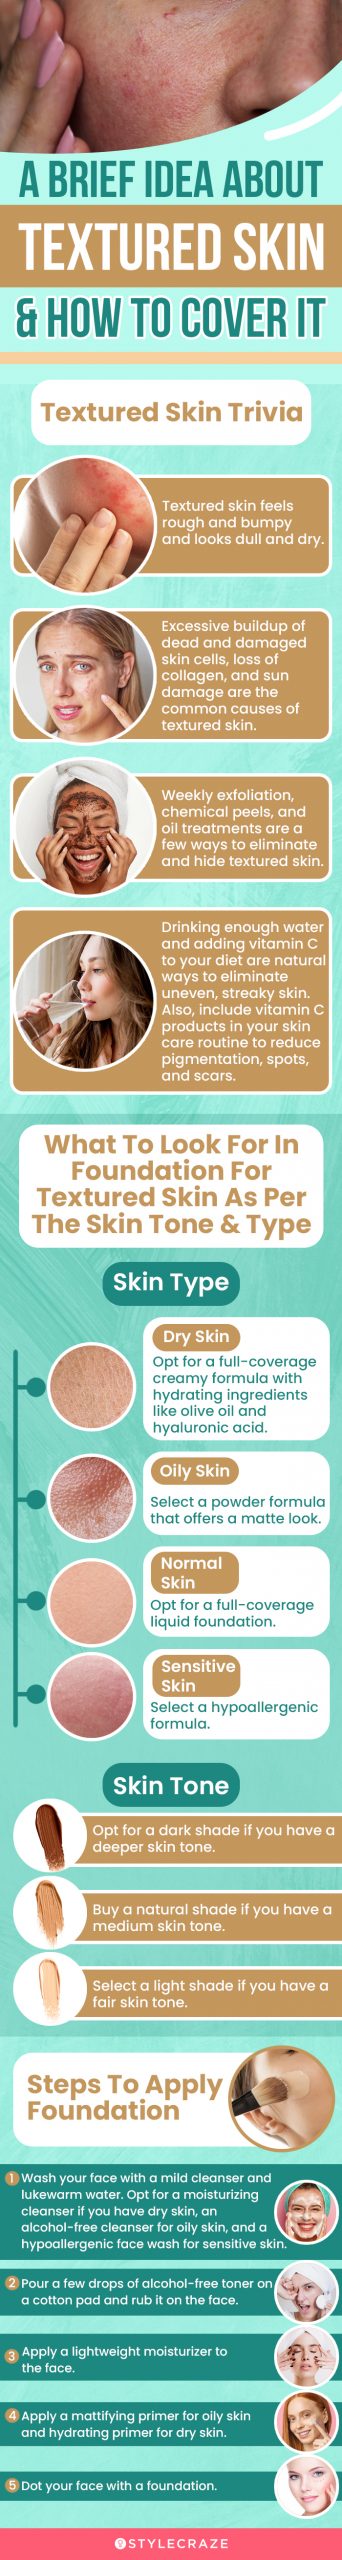 A Brief Idea About Textured Skin (infographic)